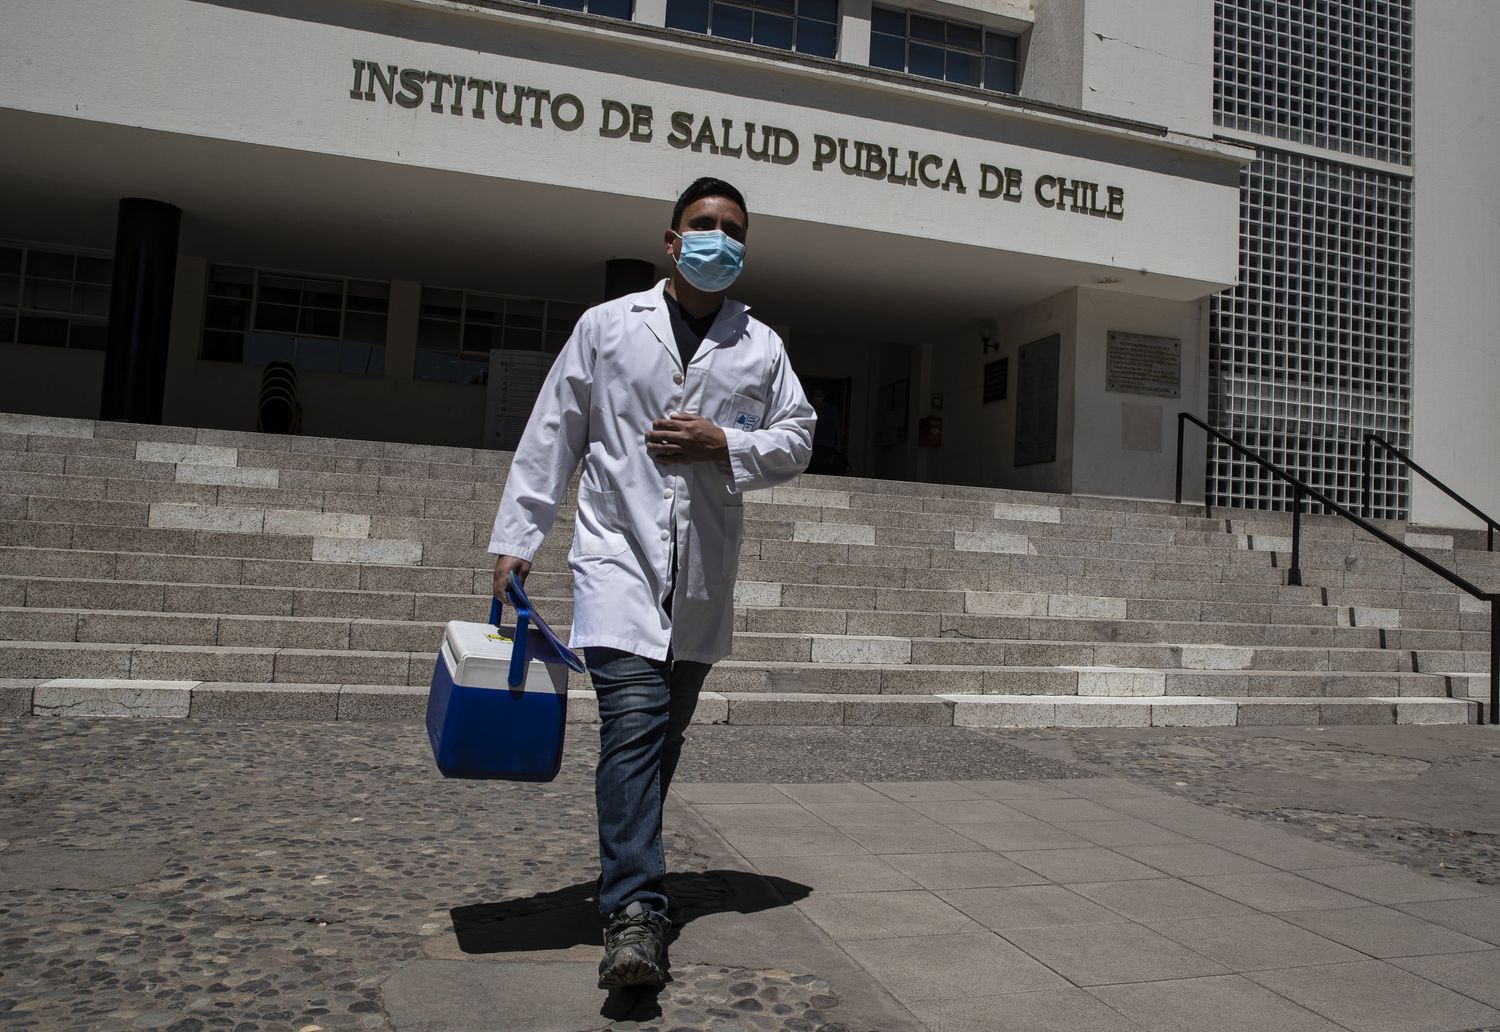 Chilean authorities said on Thursday, January 14th, they remained confident in a vaccine developed by China’s Sinovac despite jitters elsewhere after researchers in Brazil acknowledged that its efficacy was lower than initially suggested.